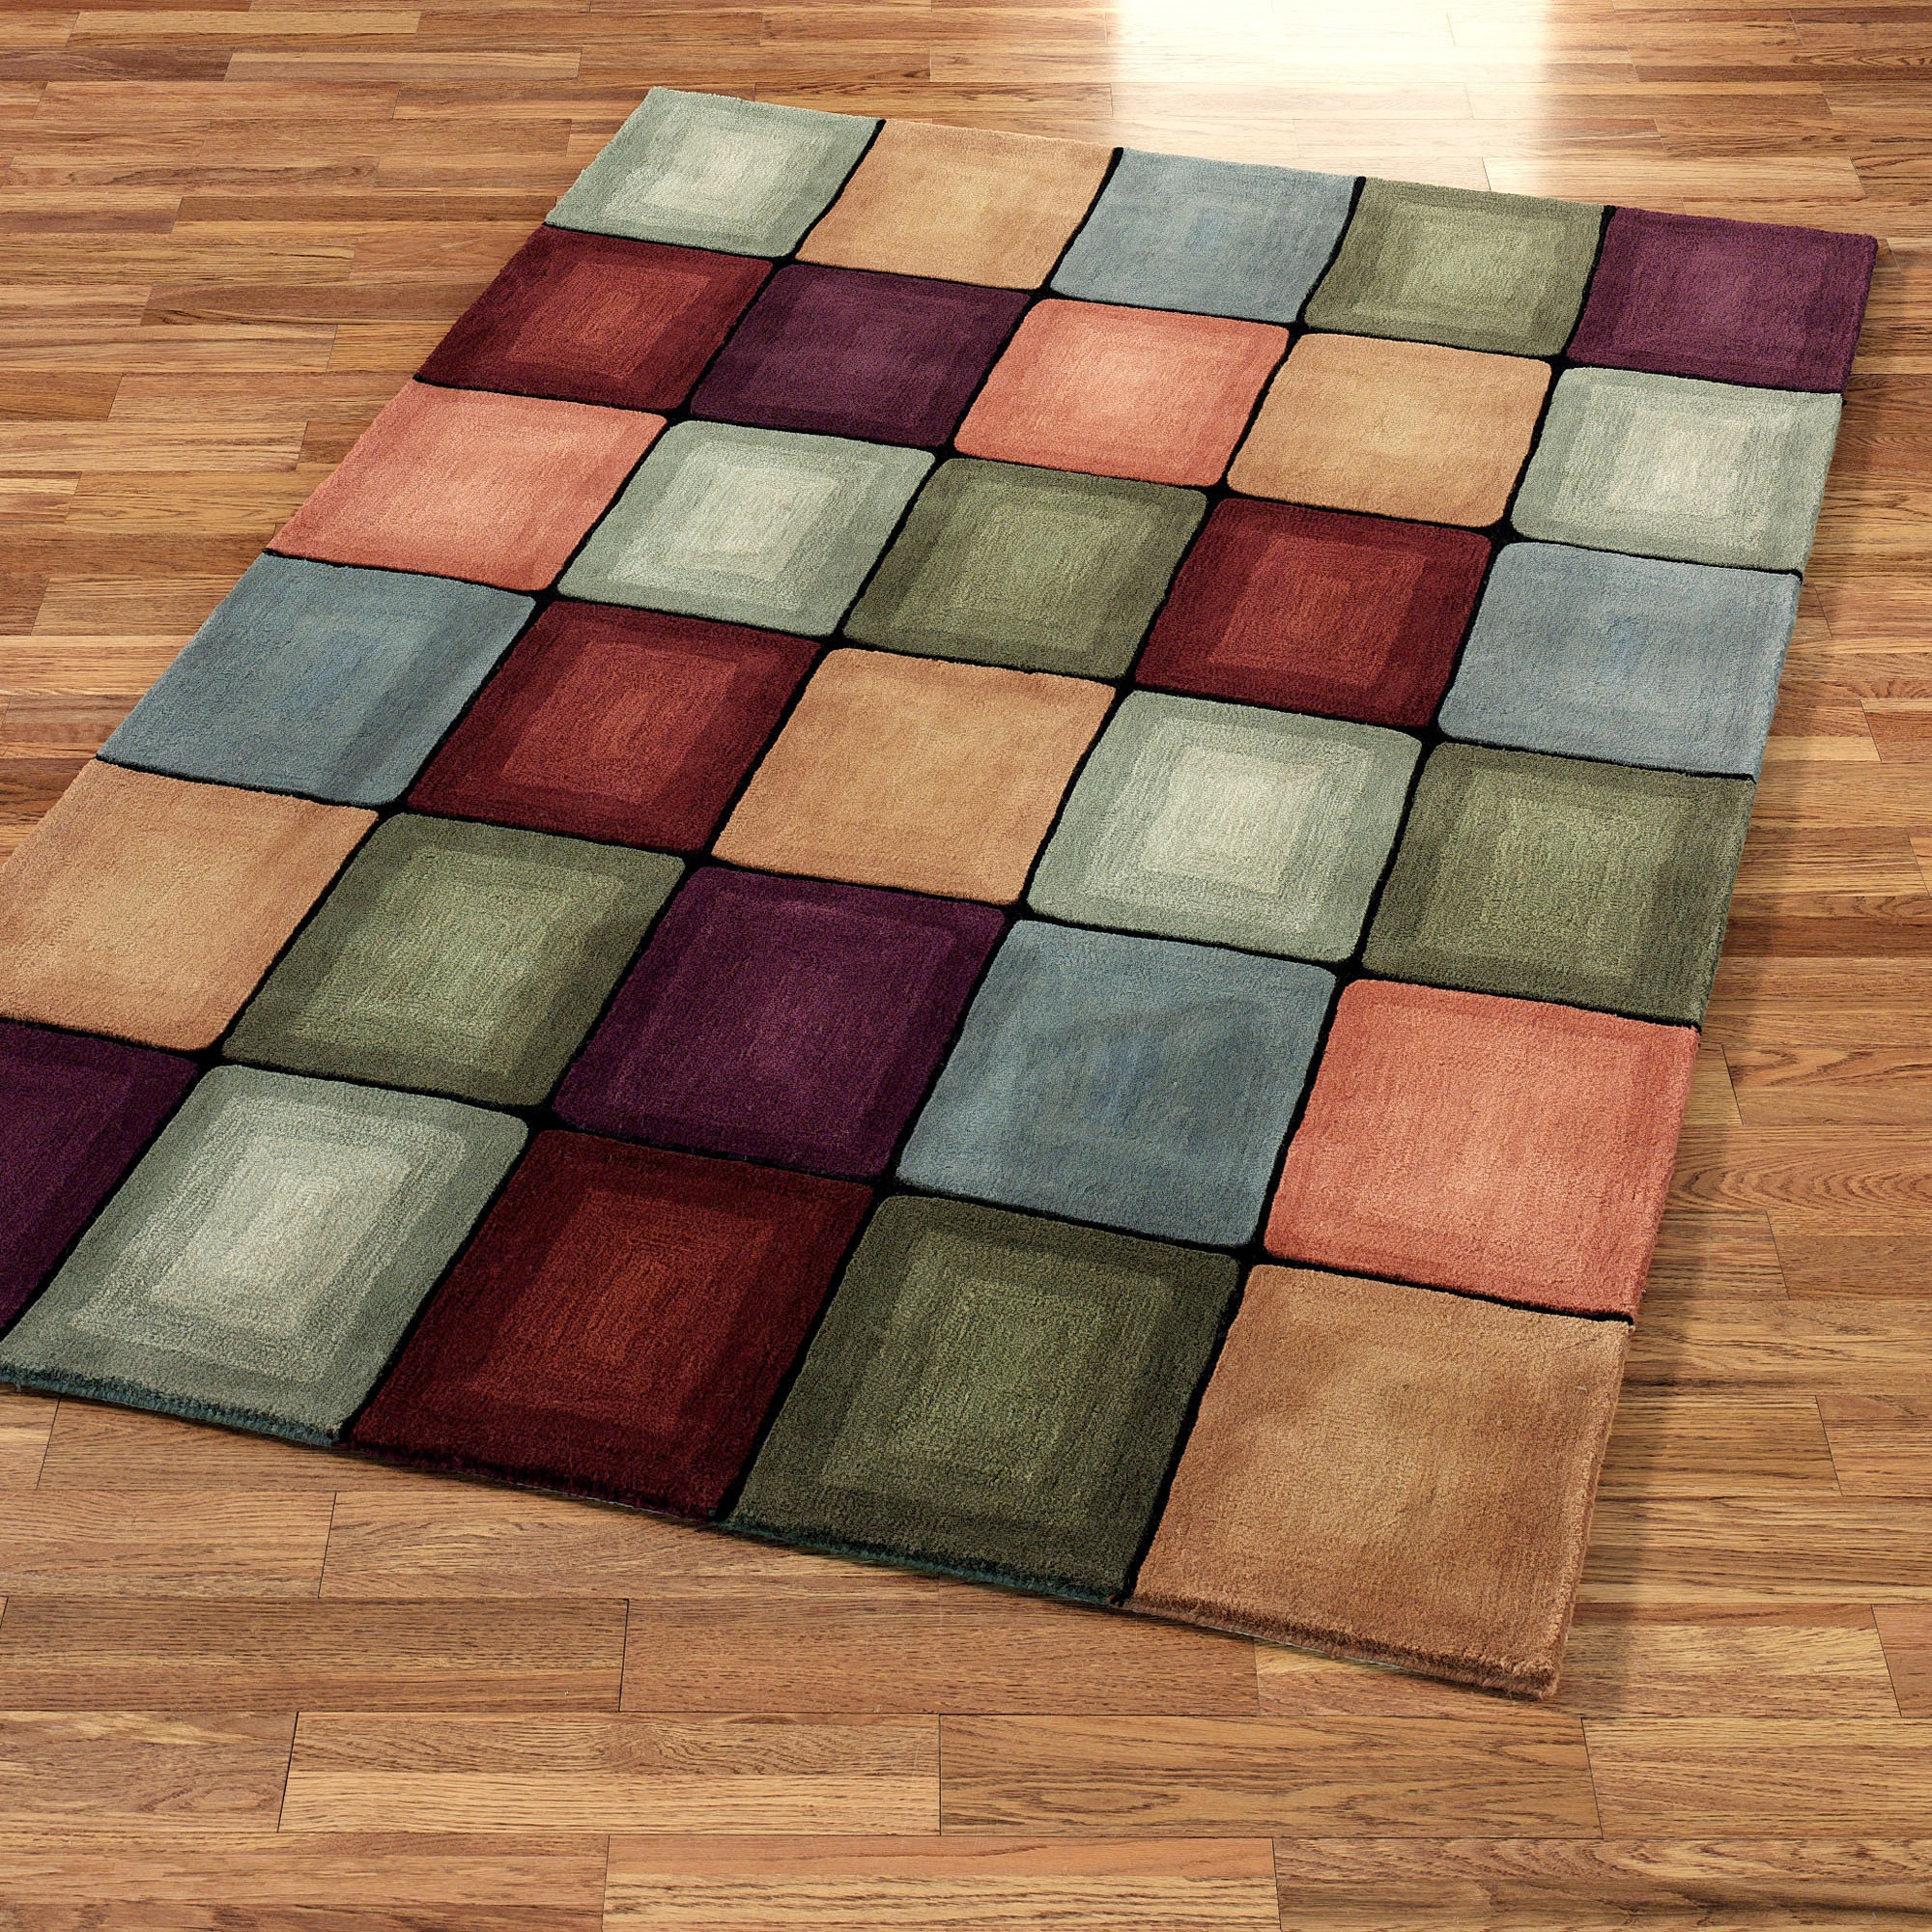 Lowes Living Room Rugs
 Floor How To Decorate Cool Flooring With Lowes Area Rugs